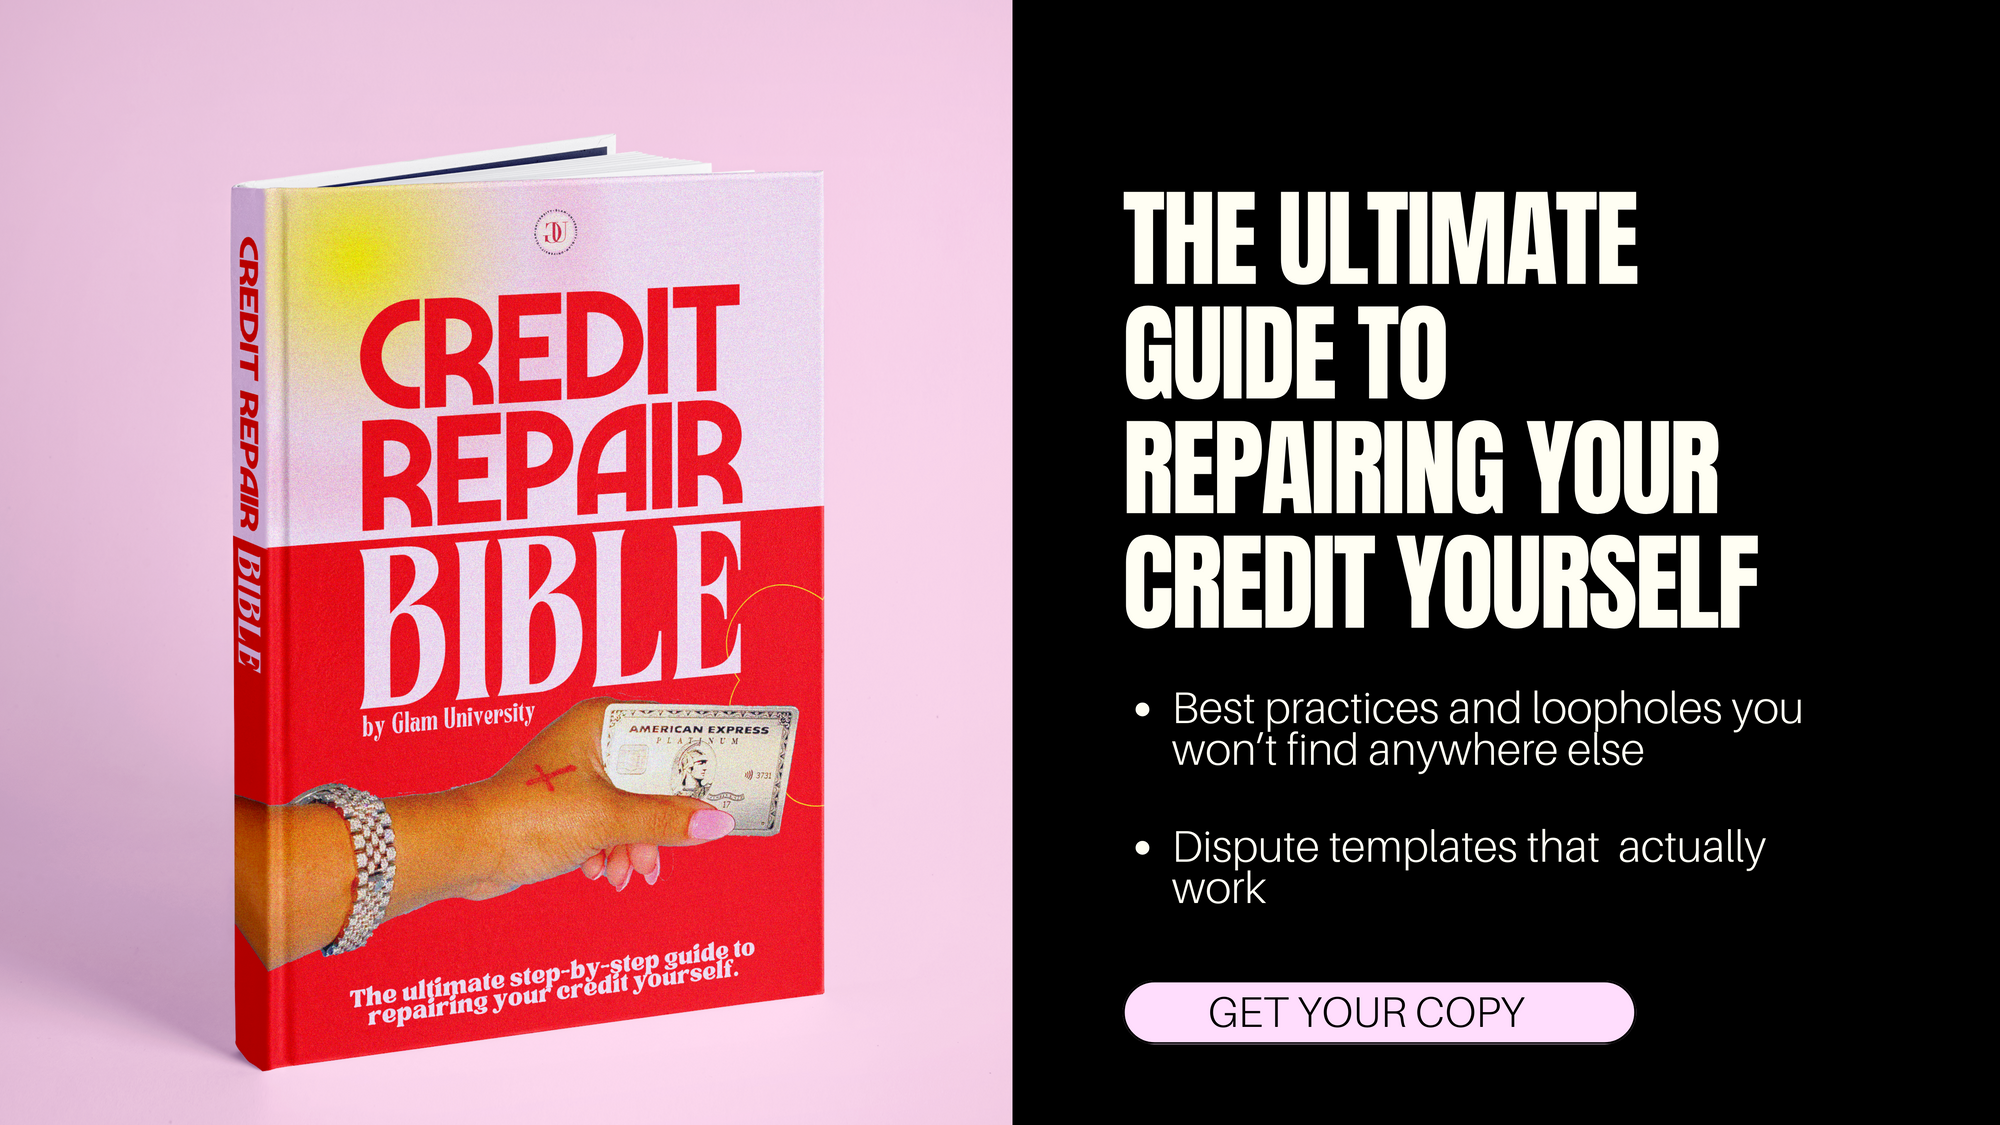 the credit repair bible is the ultimate guide to repairing your credit yourself